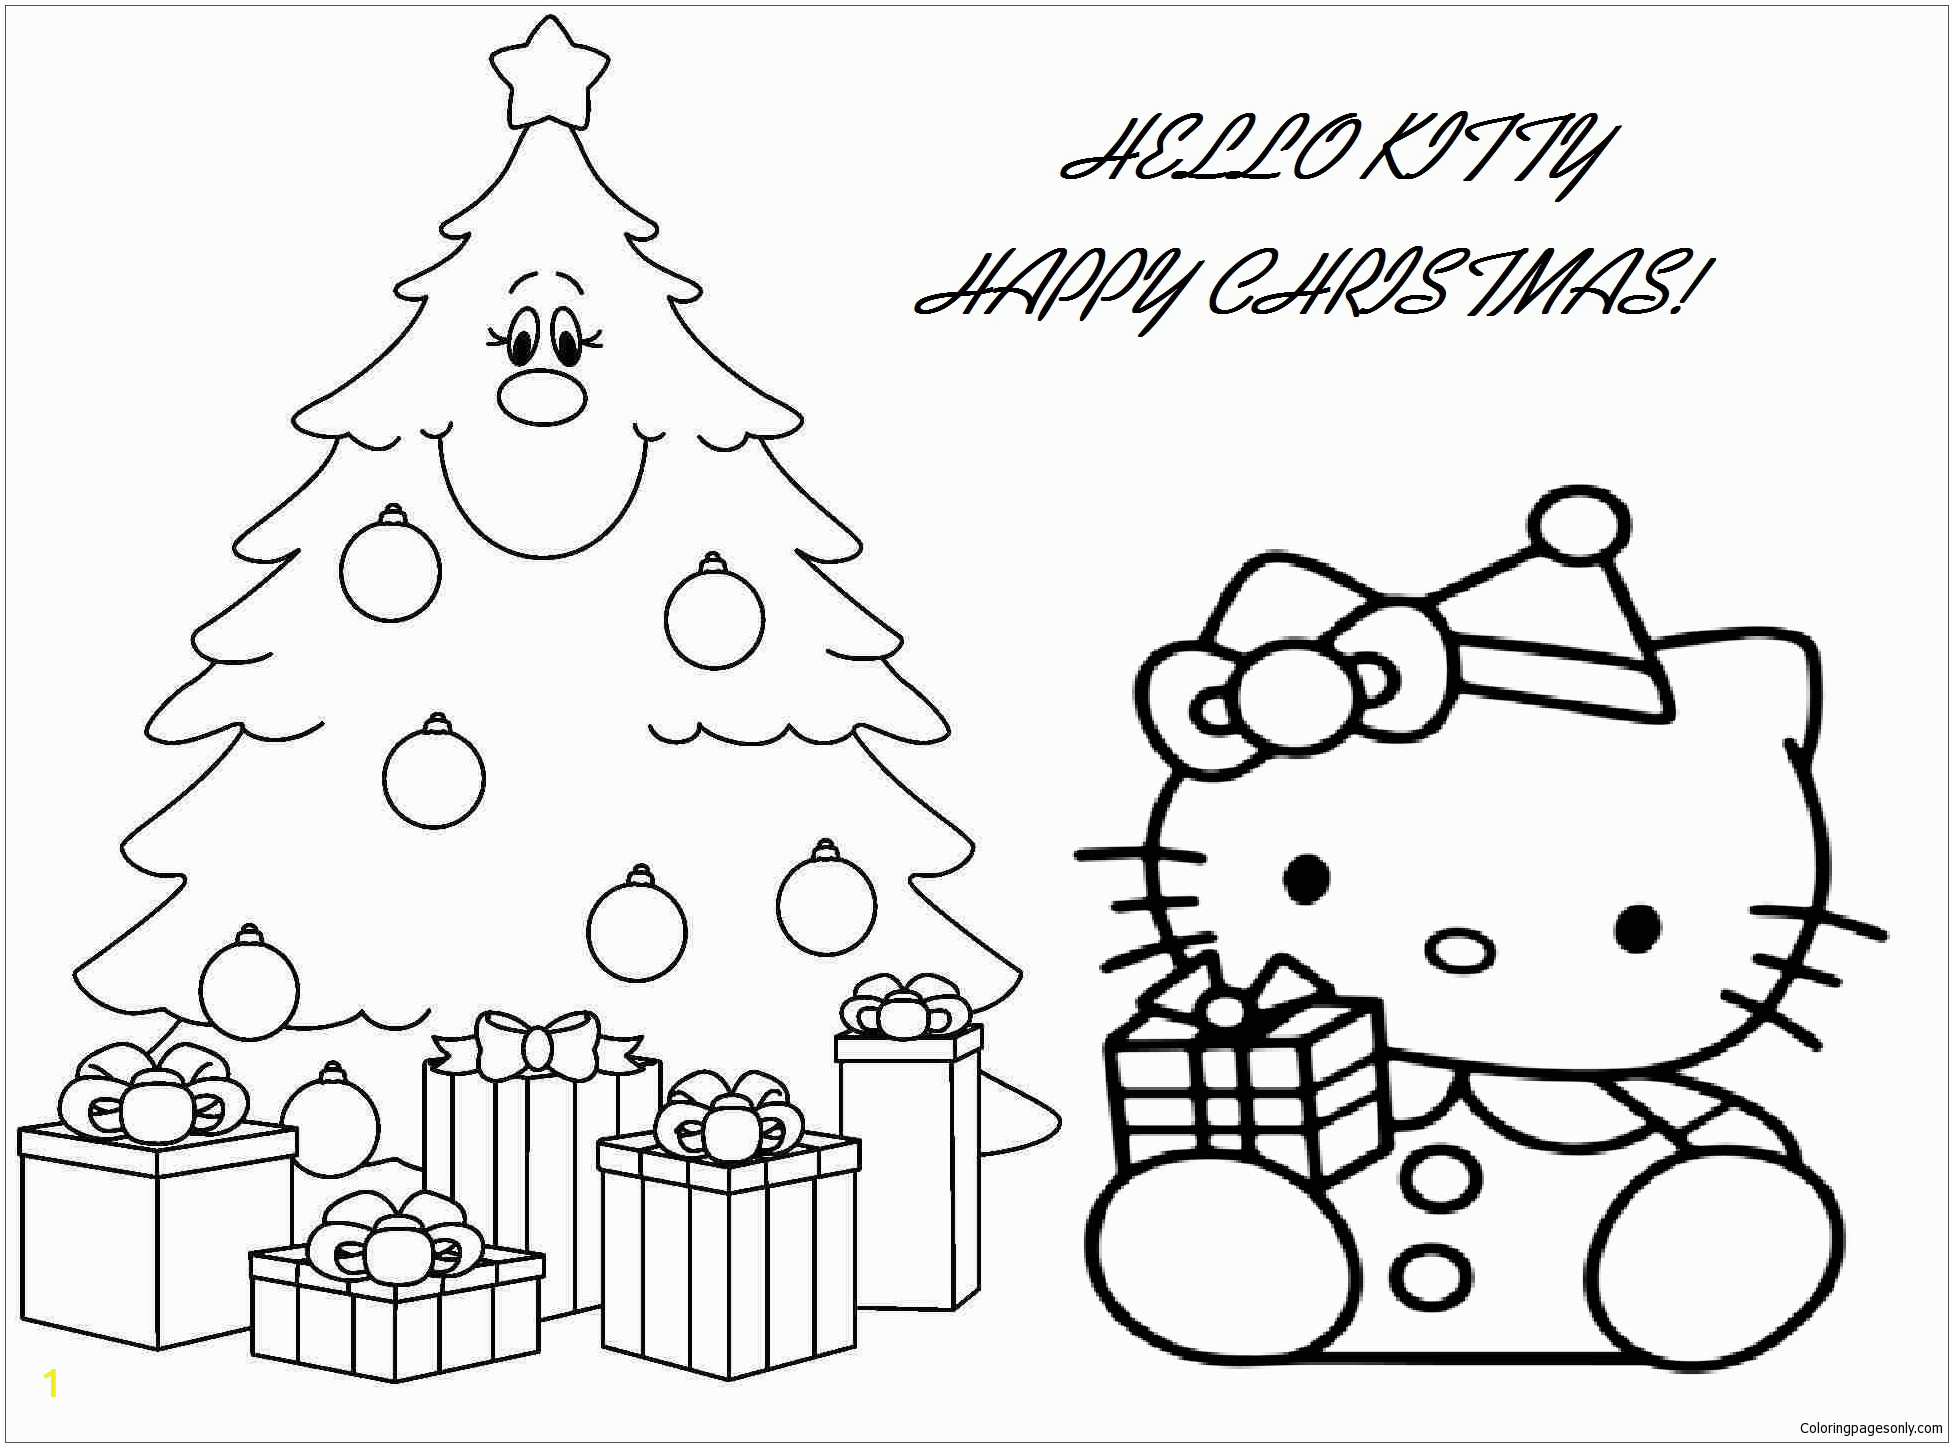 Hello Kitty Christmas Coloring Pages Free Hello Kitty with Christmas Gift Box and Christmas Tree